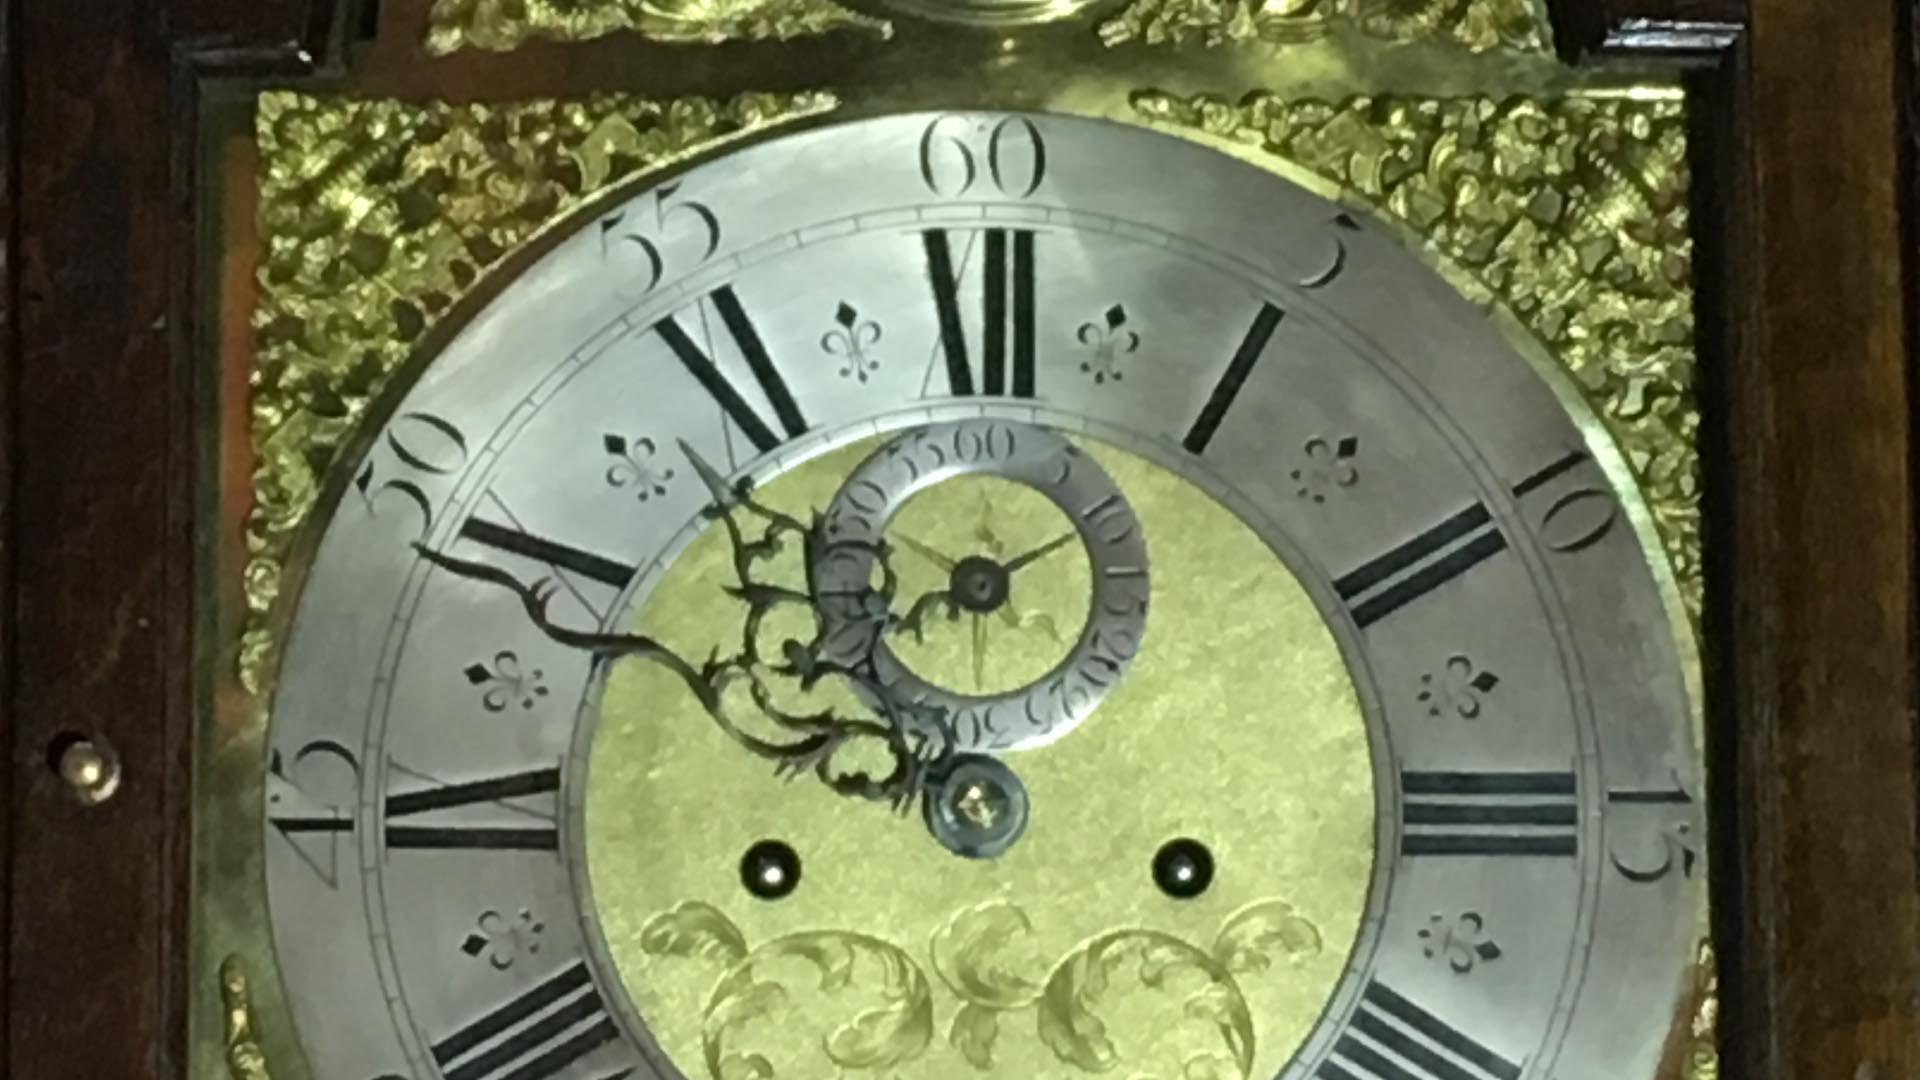 A close up of an antique clock face showing ornate hands, floral decorative motifs and Roman numerals.